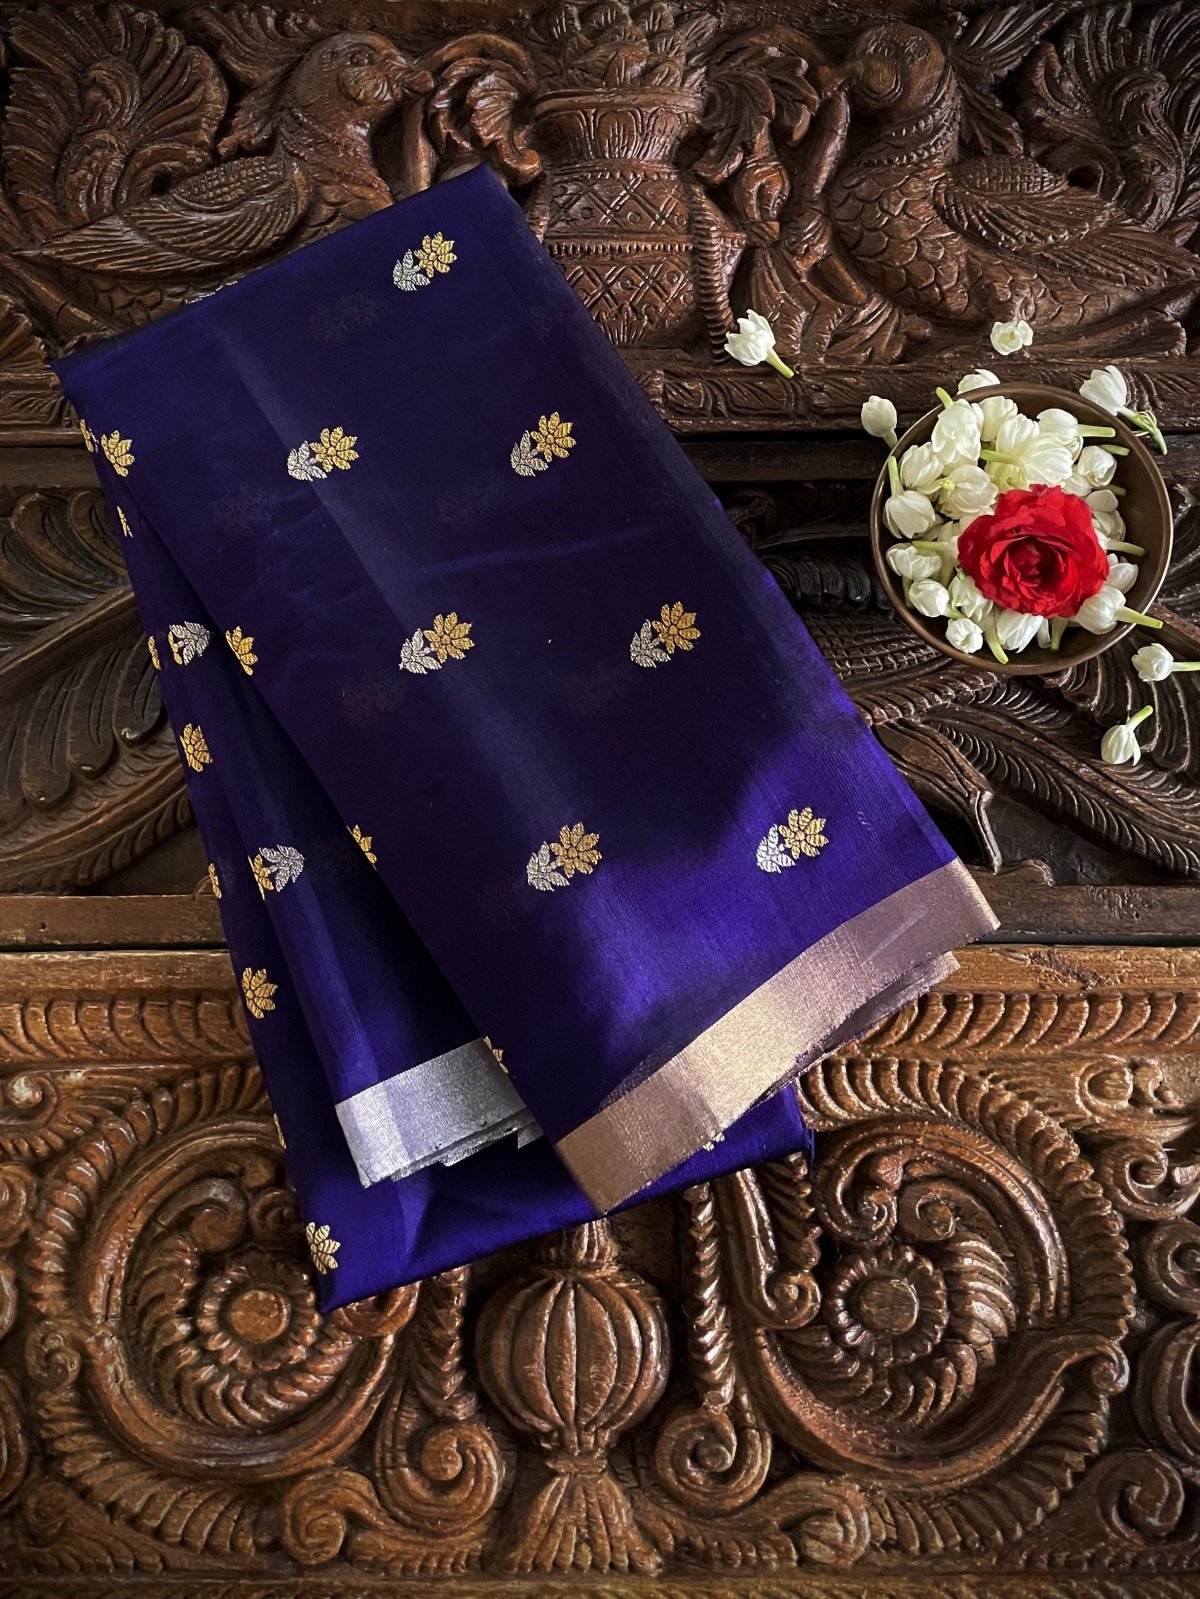 Dark Blue Chanderi Silk Blouse With Gold and Silver Zari Floral Buttis